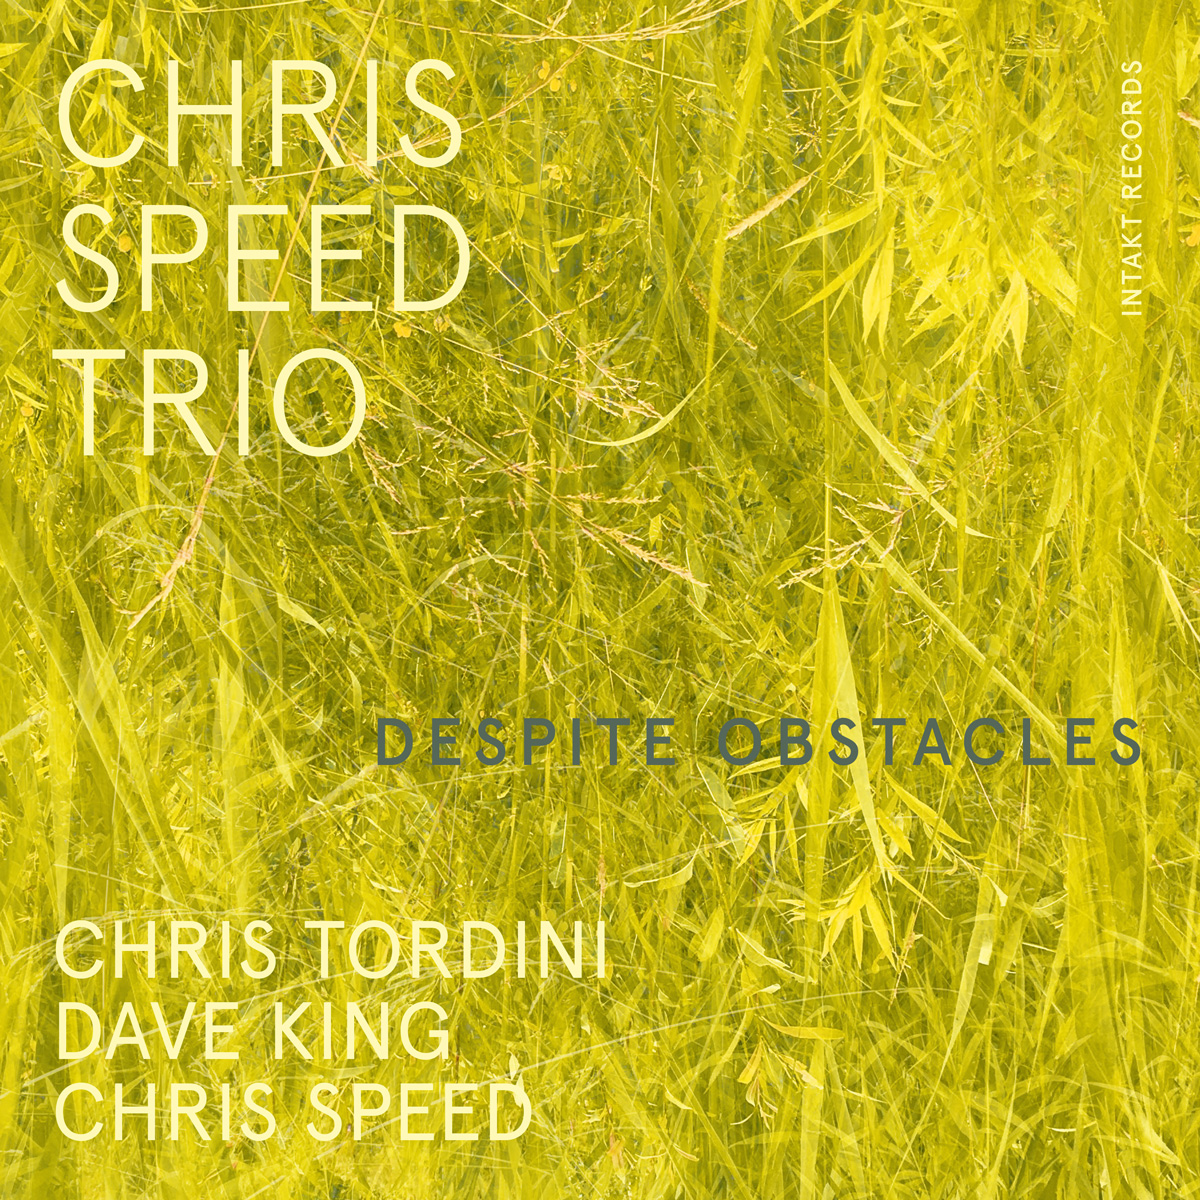 CHRIS SPEED TRIO
DESPITE OBSTACLES cover front intakt records